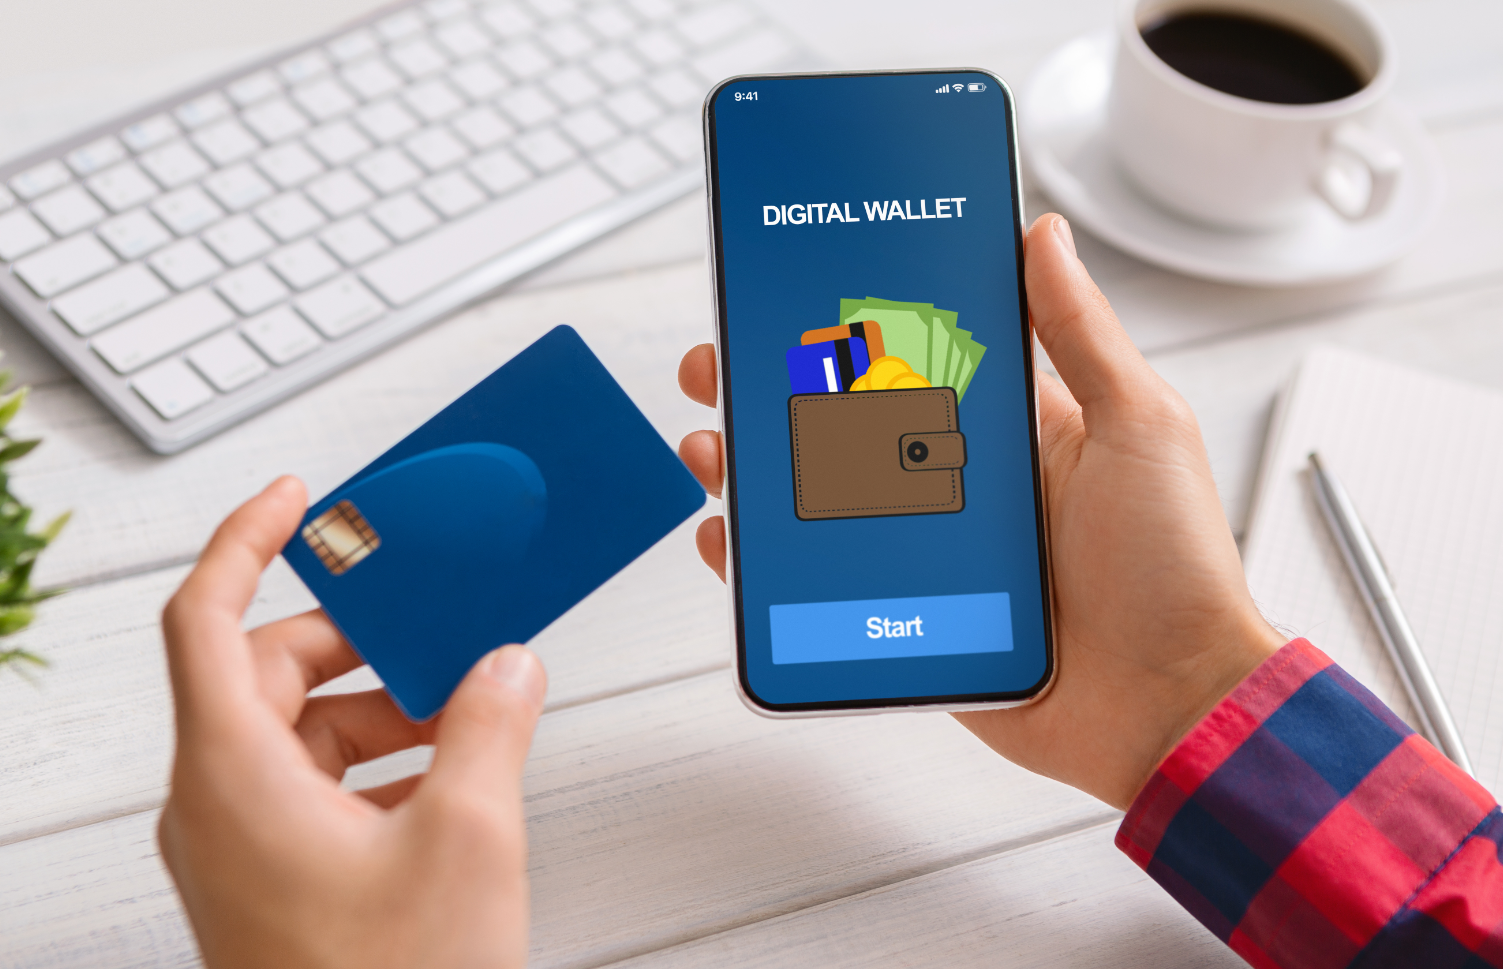 Are Protecting Your Digital Wallet Users From